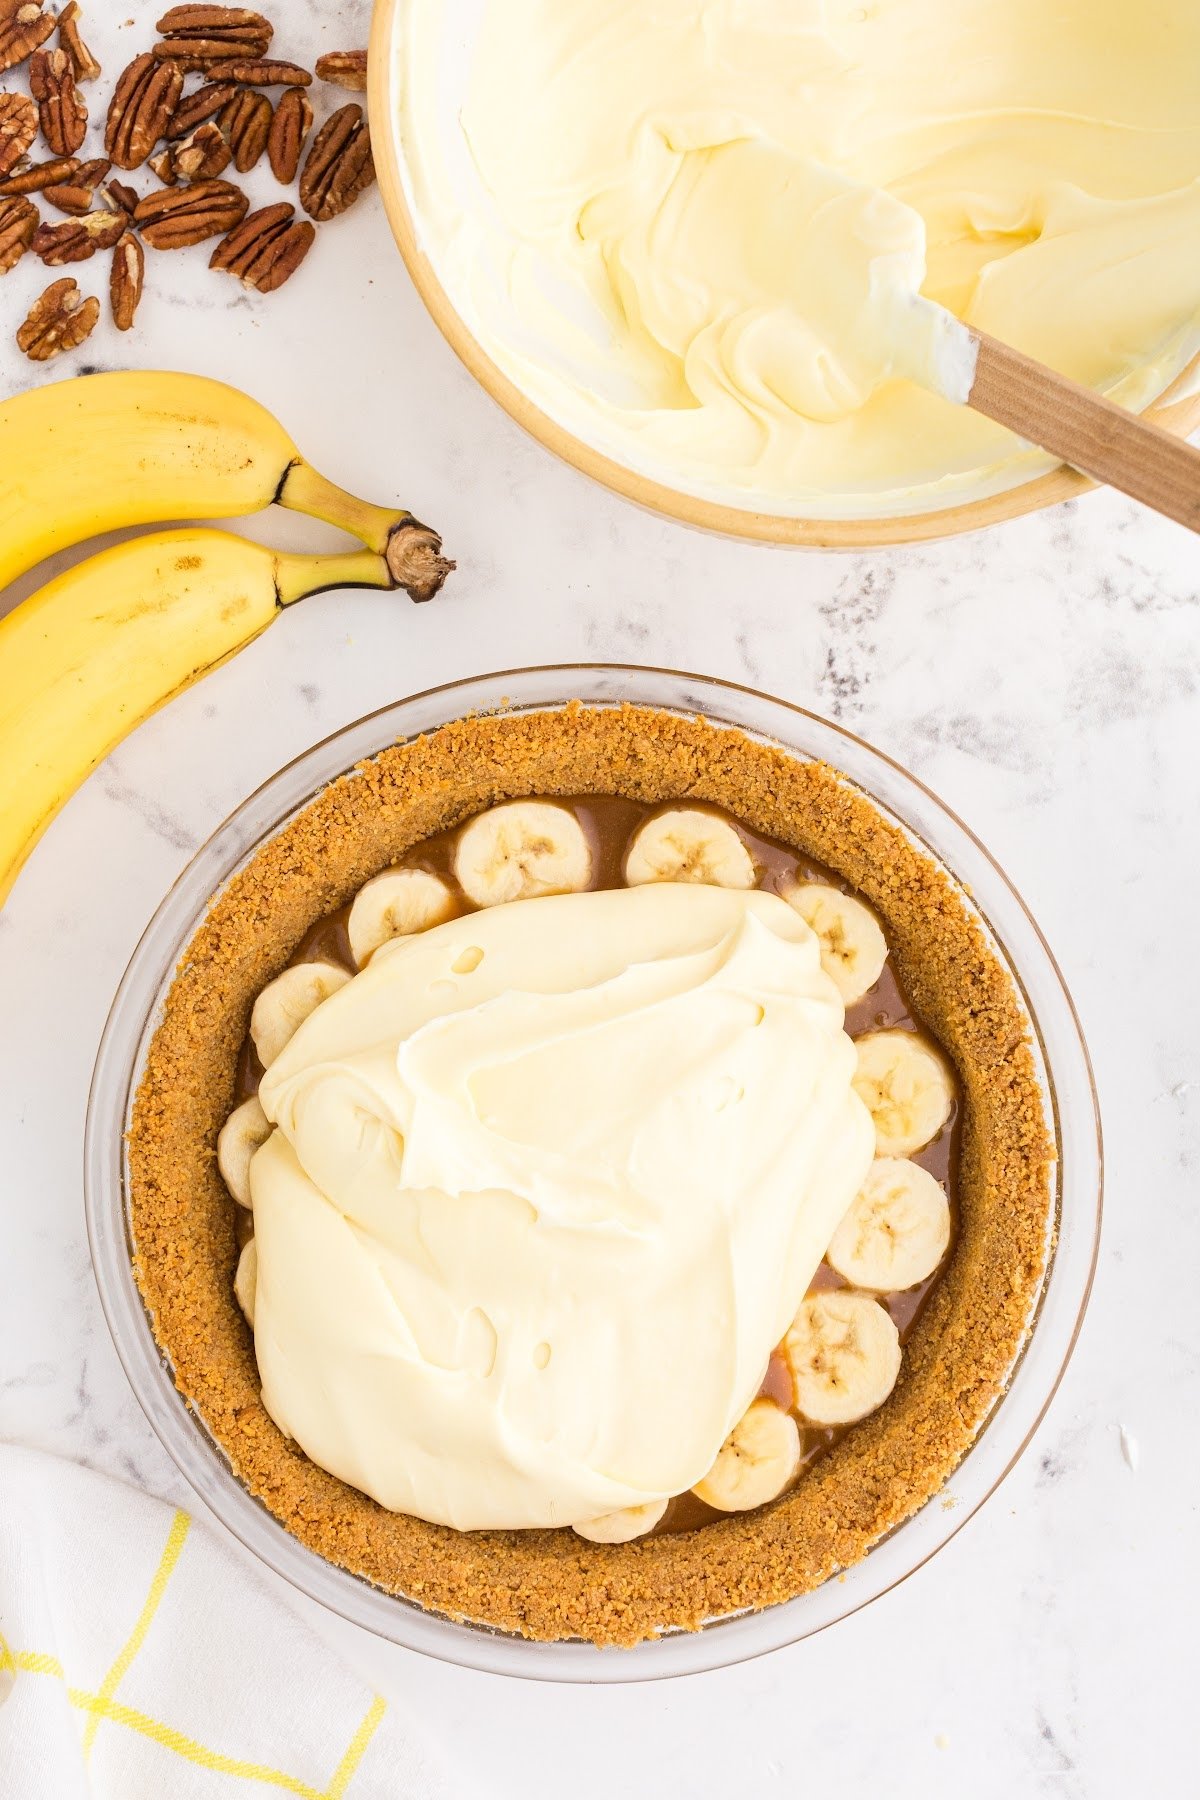 Layering the banana cream pie filling on top of sliced bananas and caramel in a graham cracker crust.